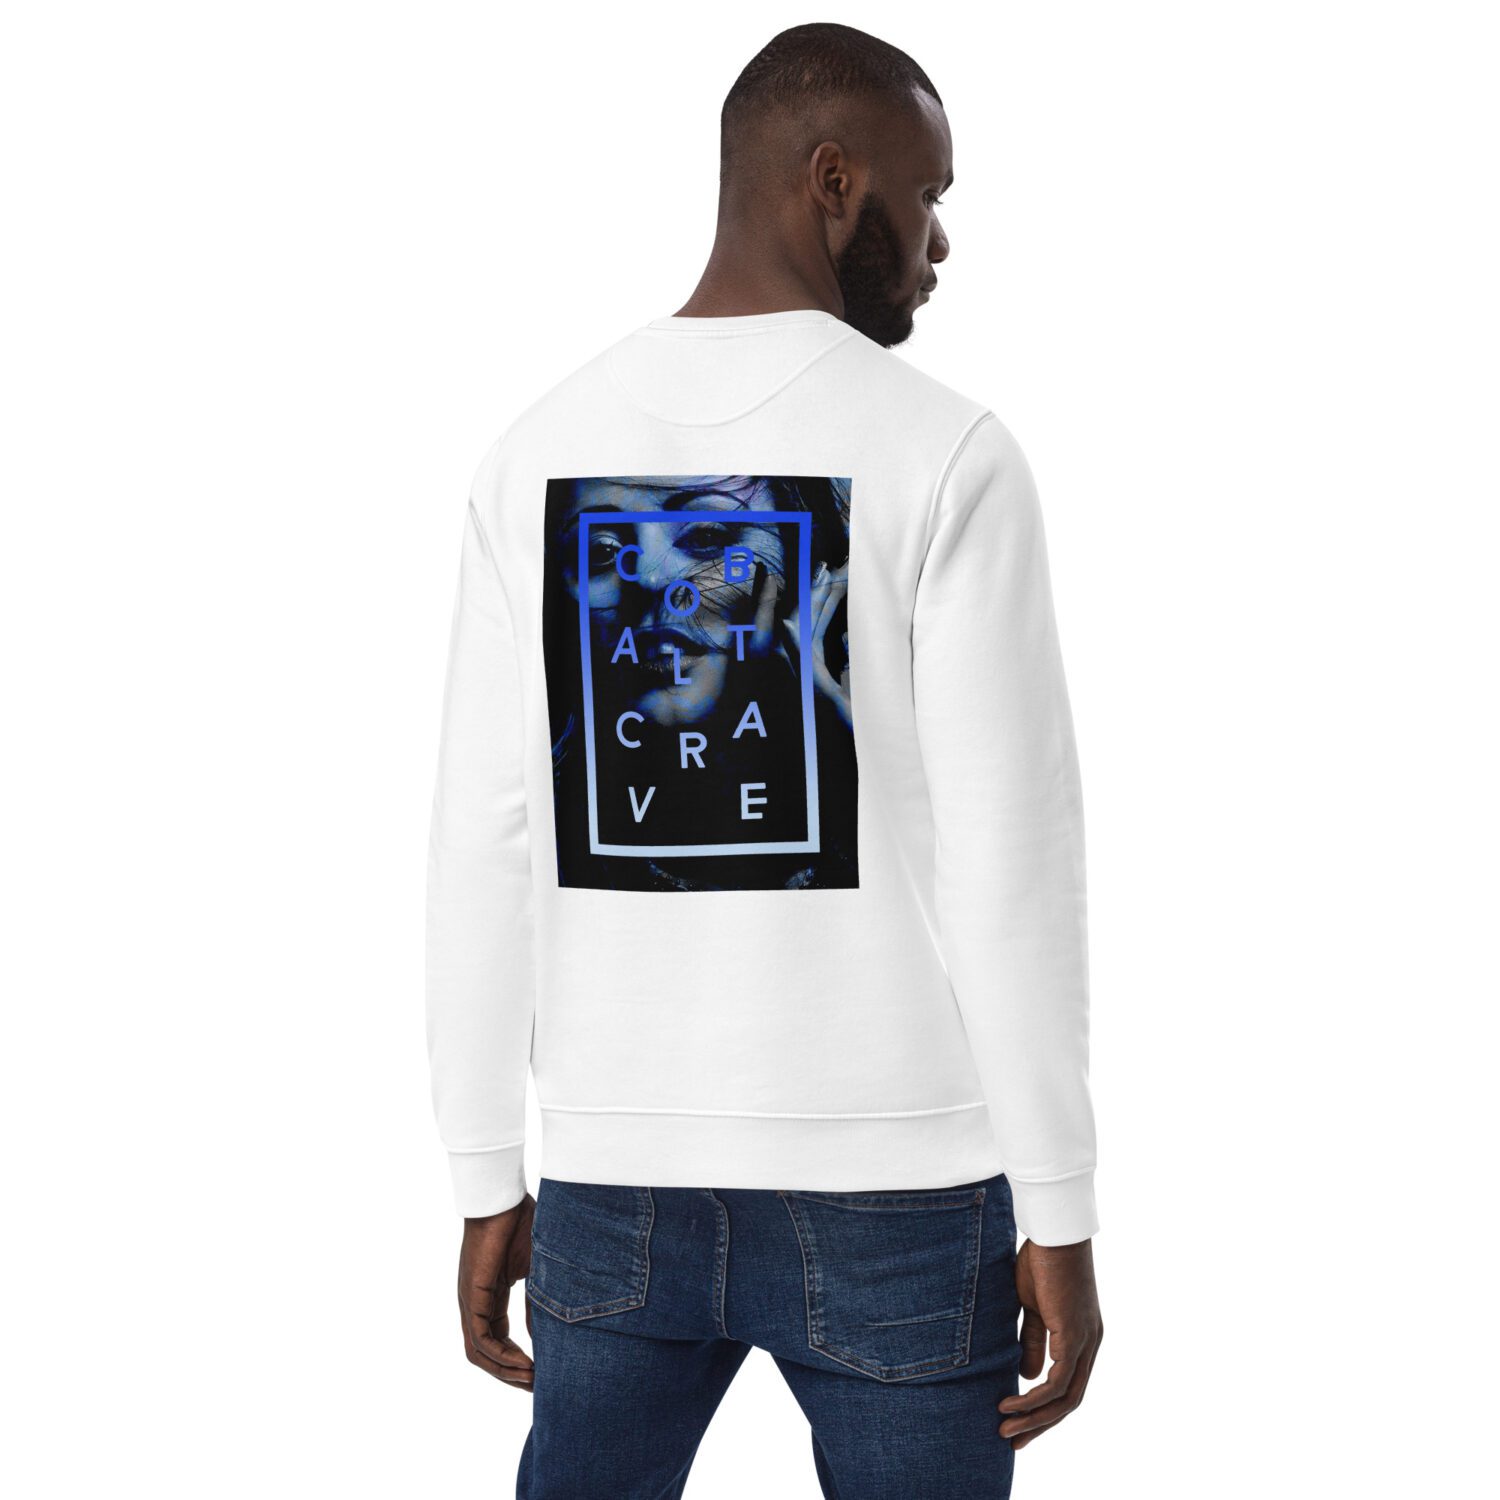 A classic slim fit white unisex sweatshirt with royal blue print on the back. Made with organic ring-spun combed cotton for a soft feel. Super soft fleece inside making it perfect for keeping warm. Cool cobalt blue print on upper back and logo in the front.